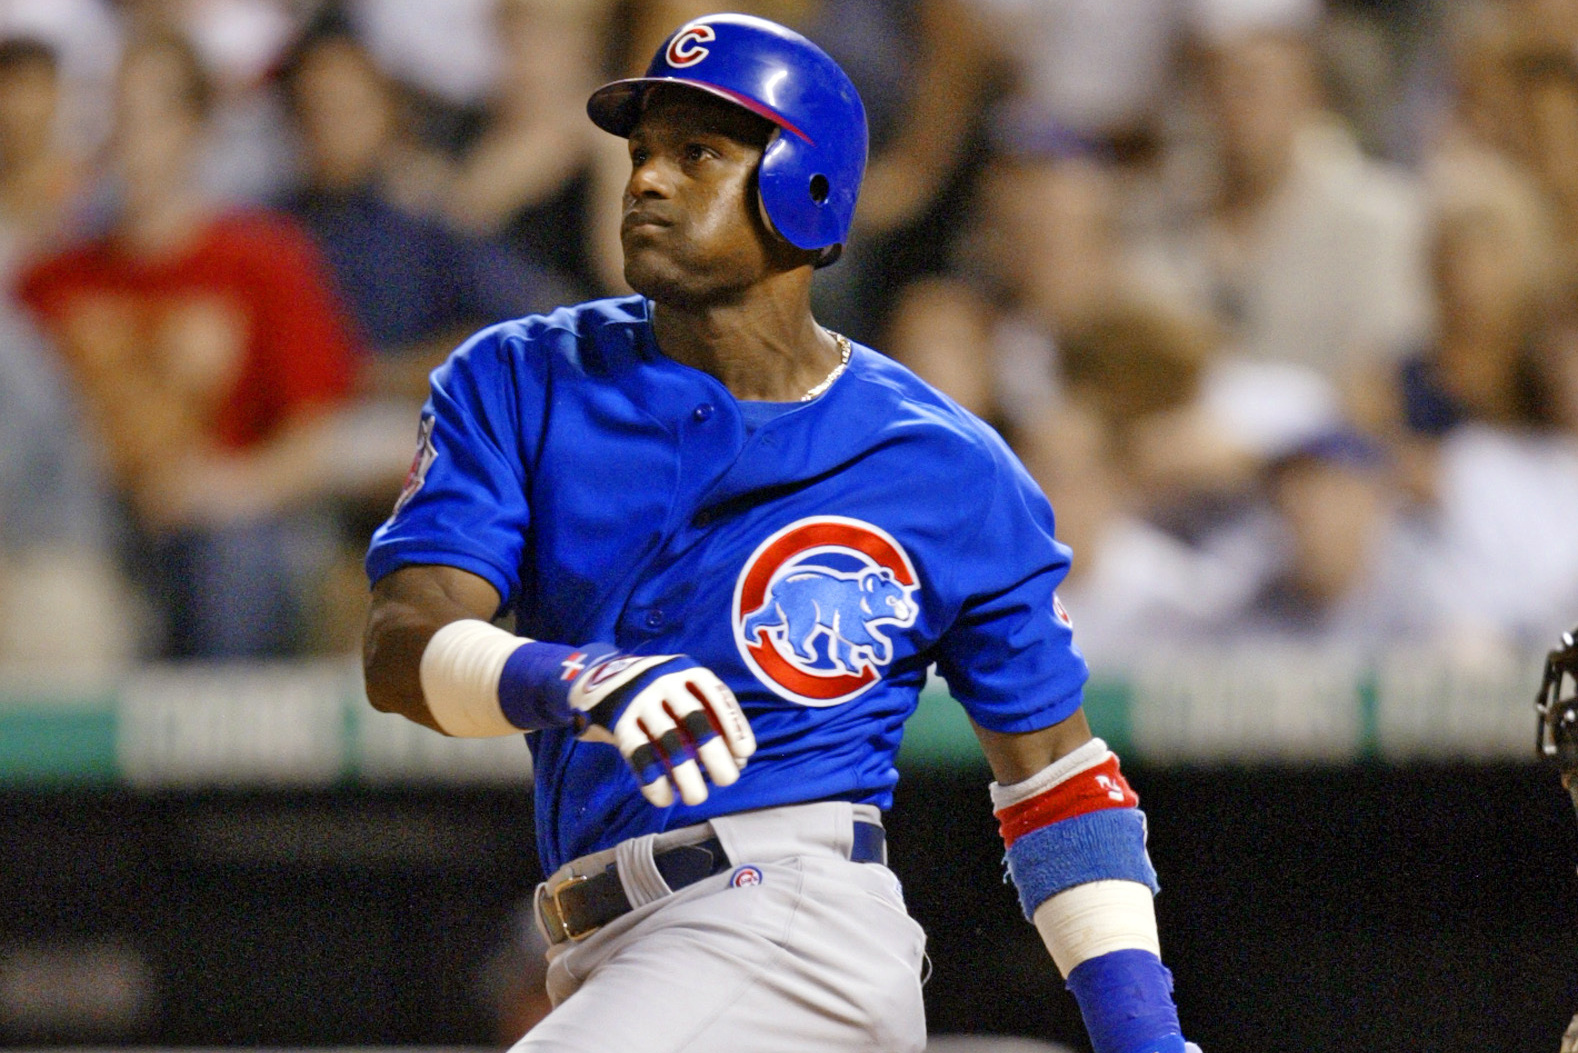 Chicago Cubs want Sammy Sosa to make amends before retiring number